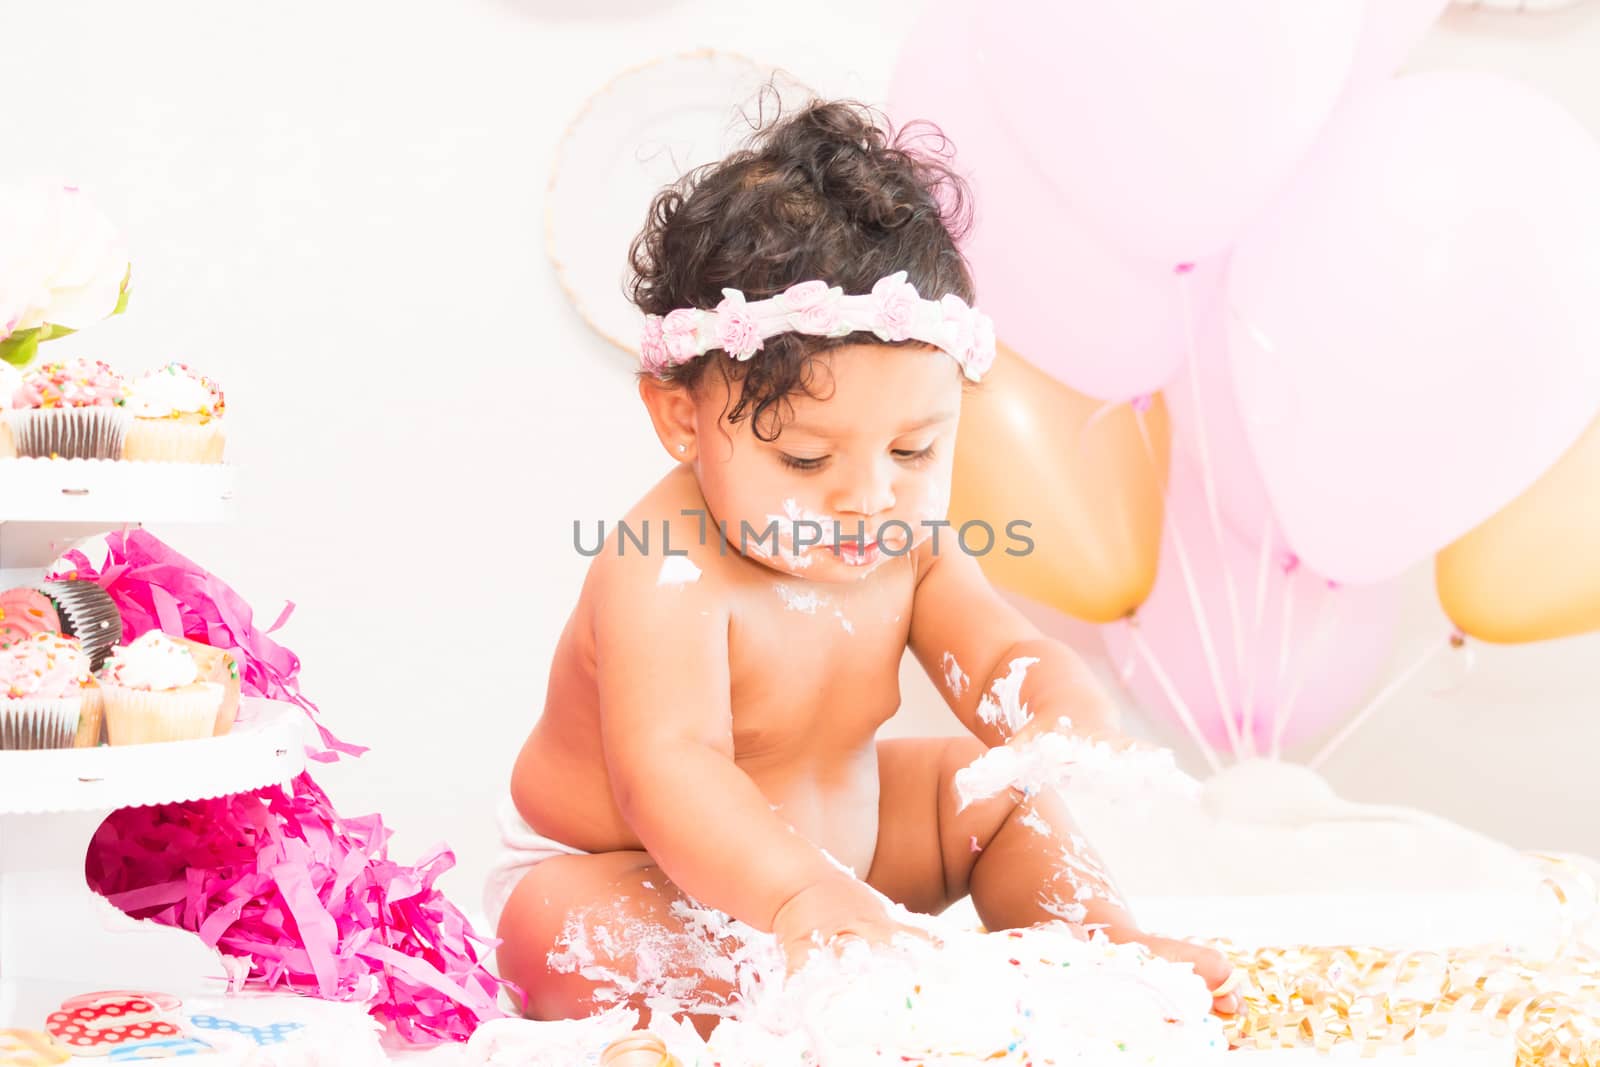 Young Baby Girl Celebrating Her First Birthday With Cake